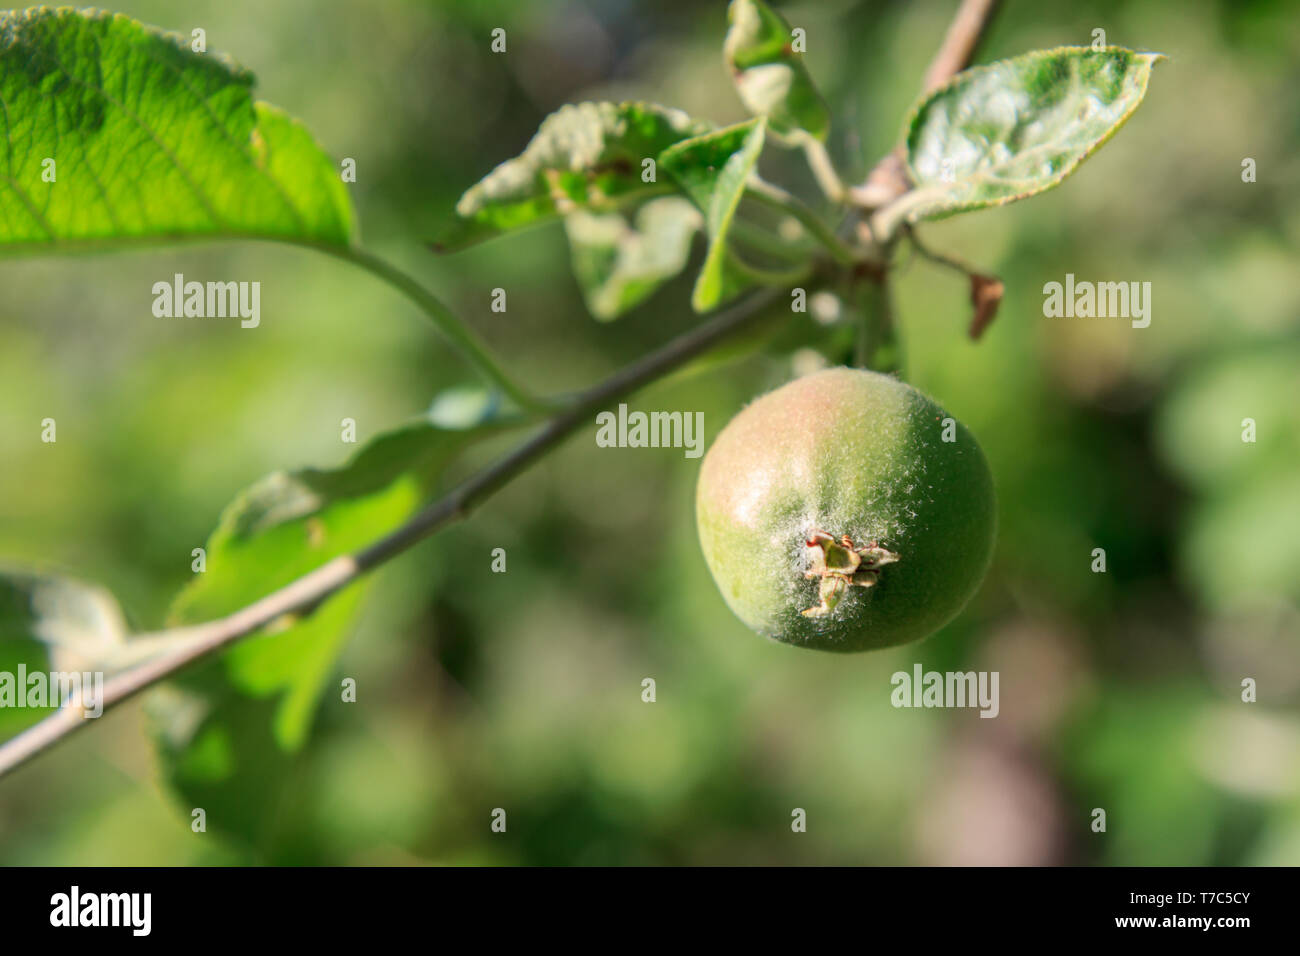 Fruit of immature apple on the branch of tree with leaves affected by fungal disease. Shallow depth of field. Fruit growing in the garden Stock Photo